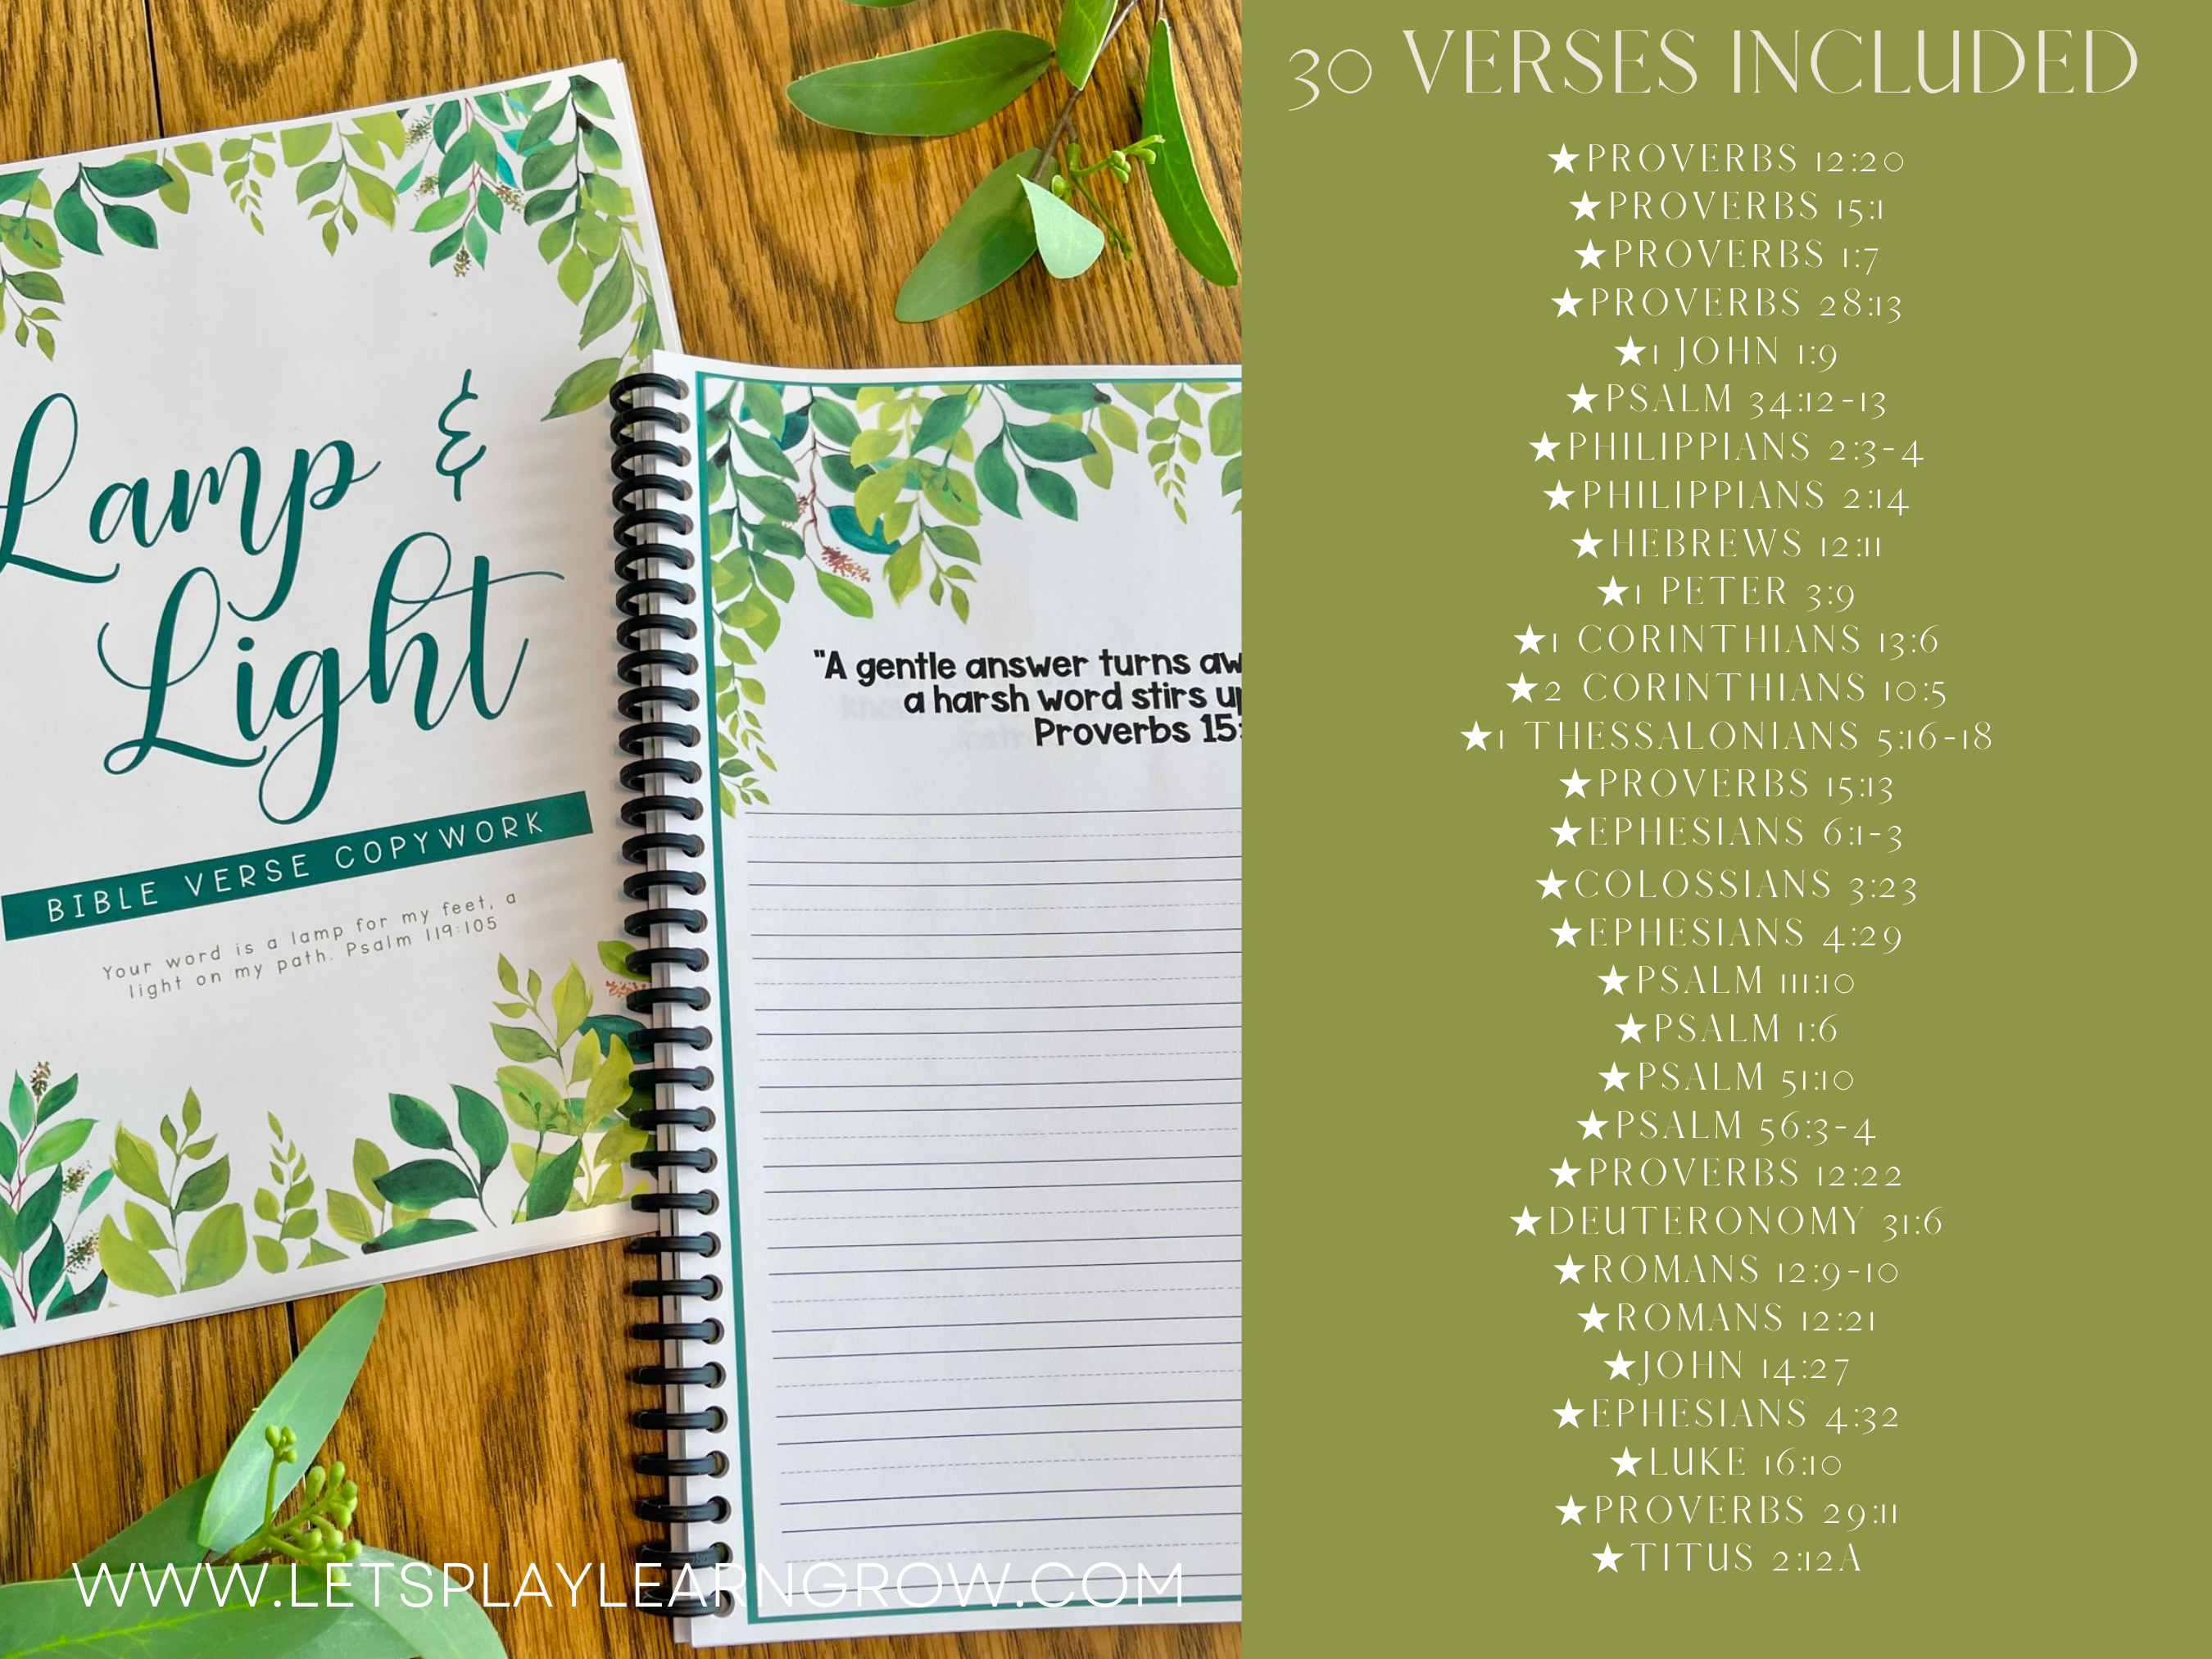 Verses included in the Lamp & Light Bible Verse copywork include: